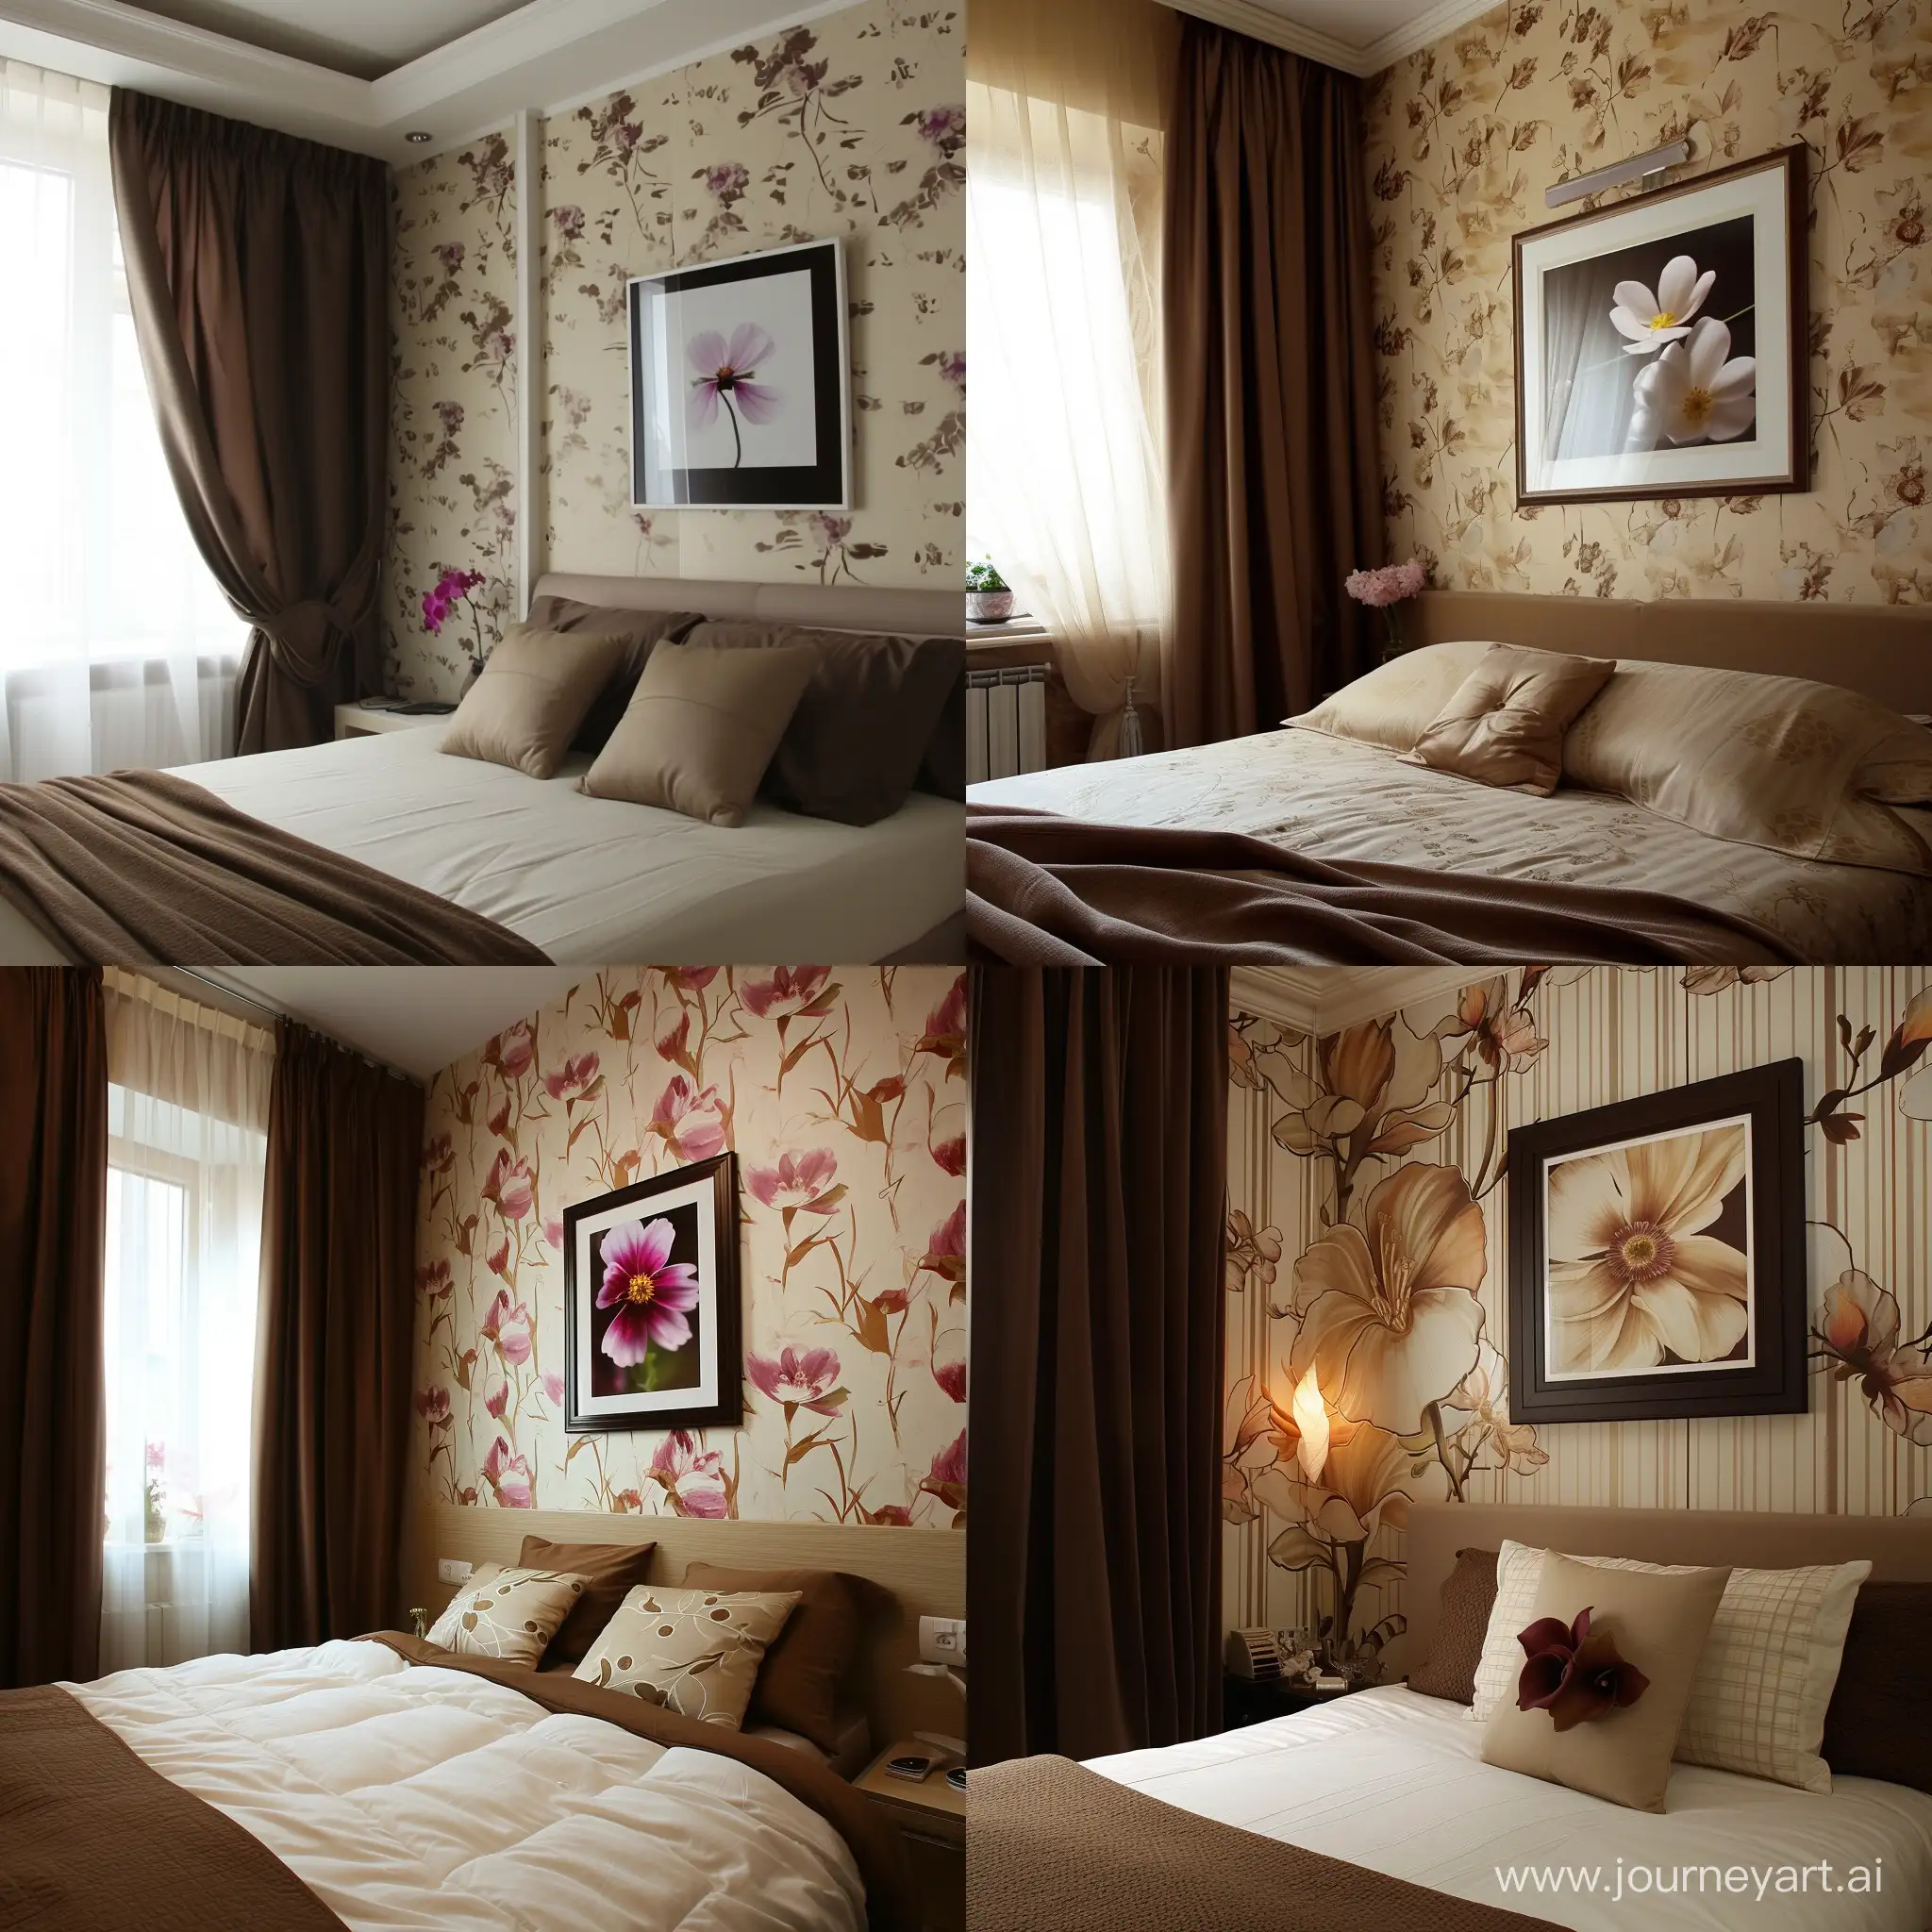 bedroom design. There is a bed, a picture with a flower, brown curtains, wallpaper with flowers
